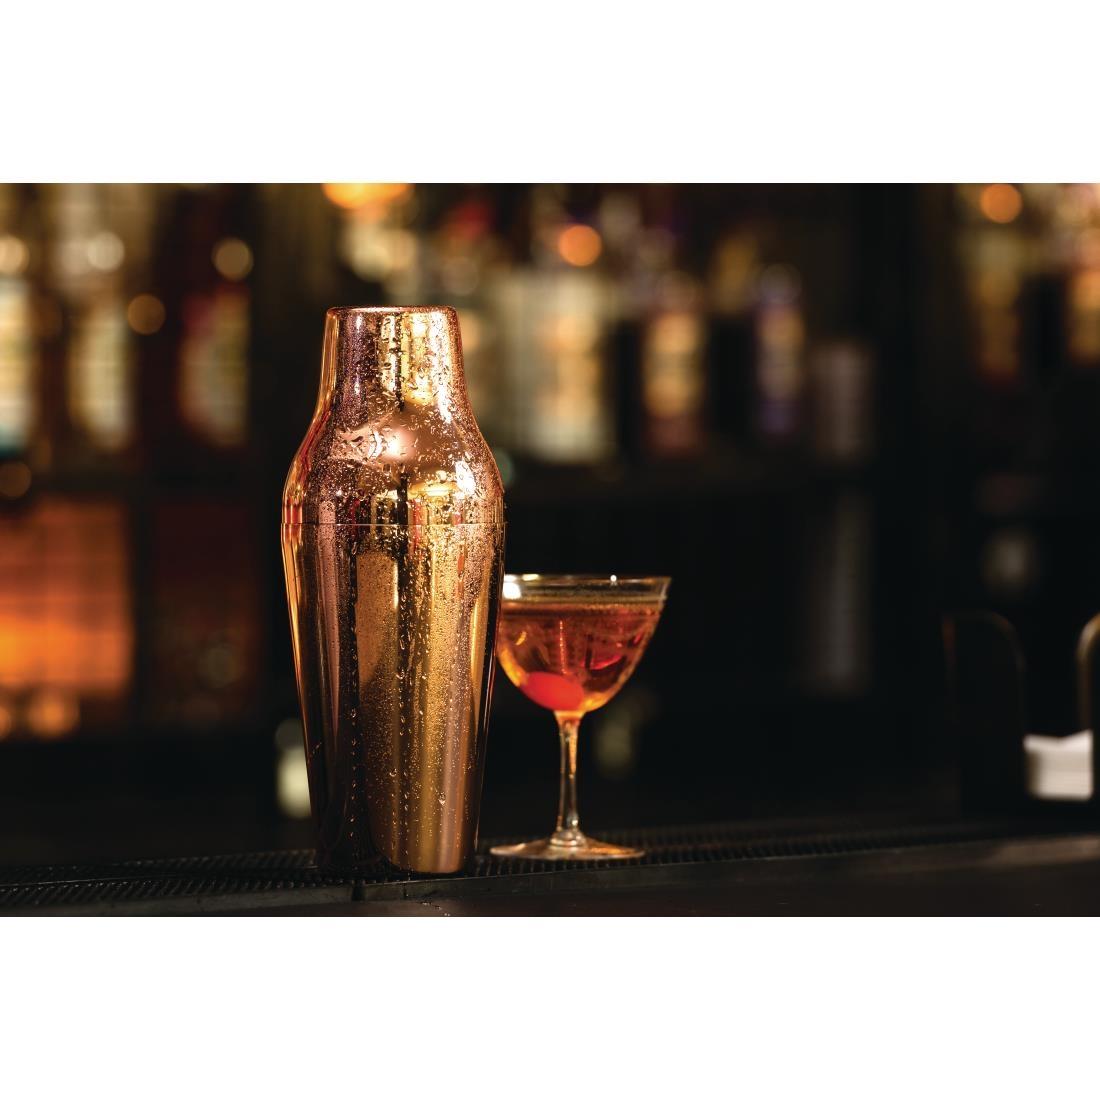 Beaumont French Cocktail Shaker Copper - GK959  - 4